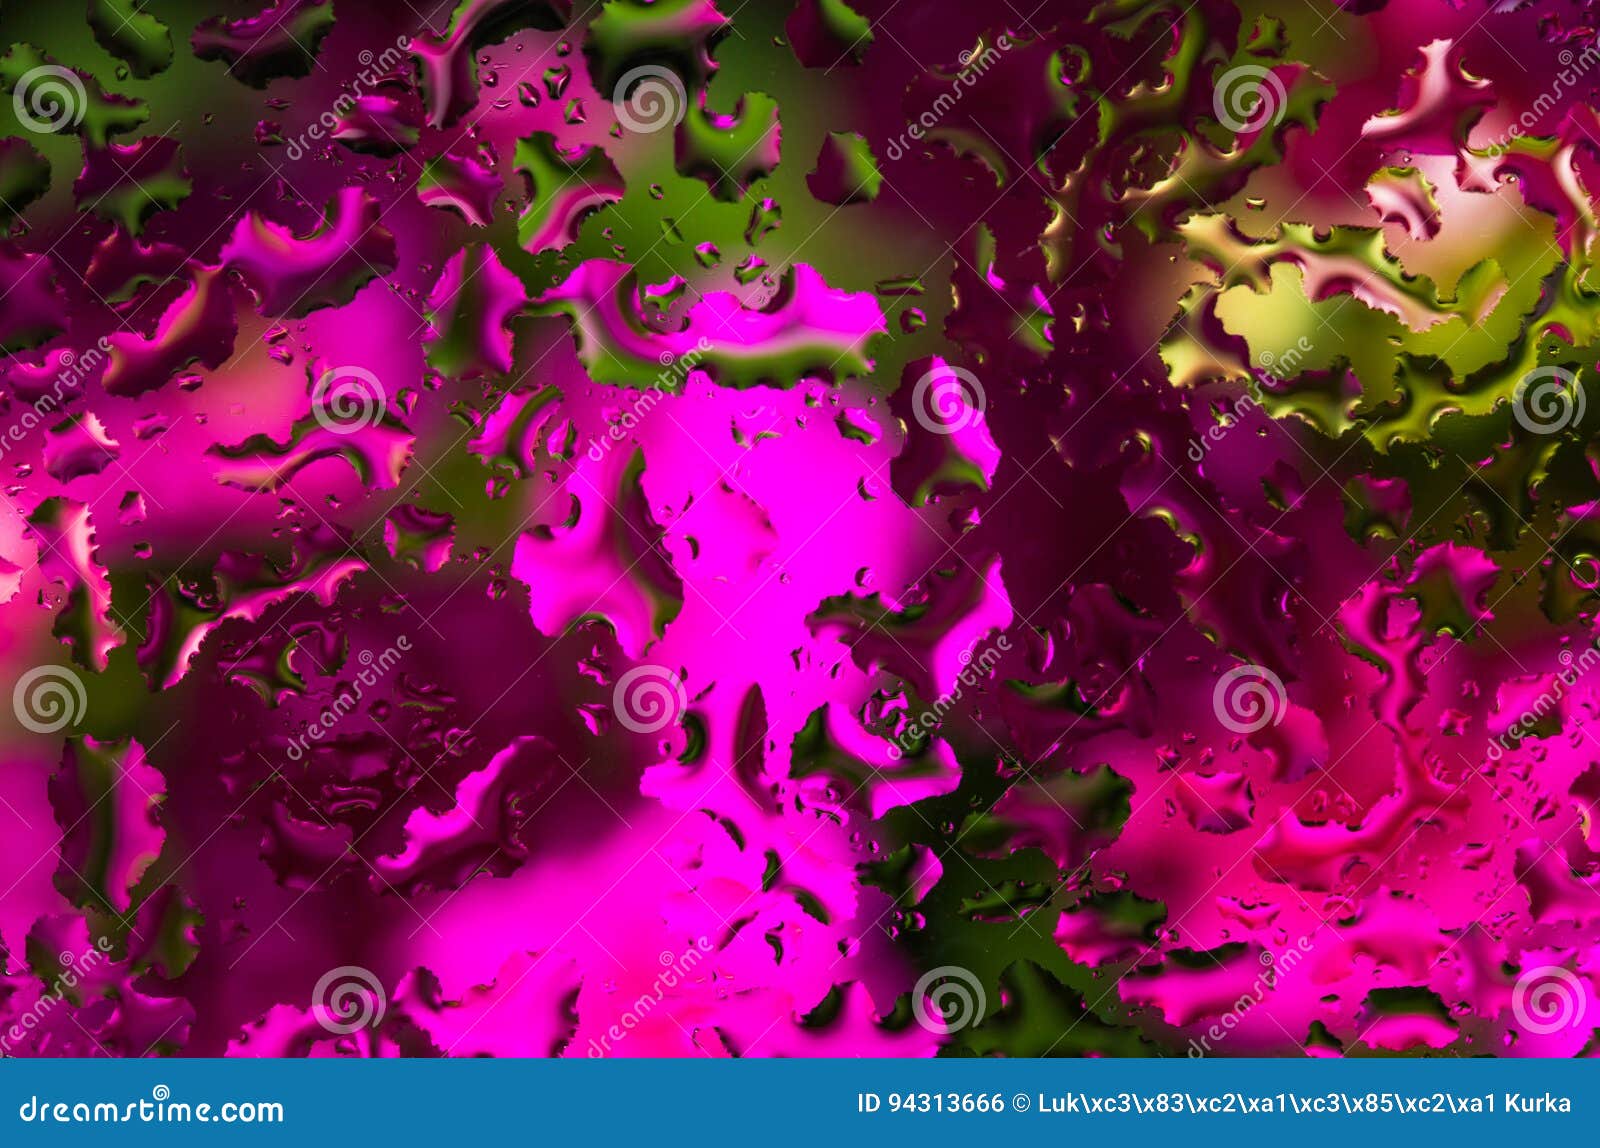 202,125 Green Pink Wallpaper Stock Photos - Free & Royalty-Free Stock  Photos from Dreamstime